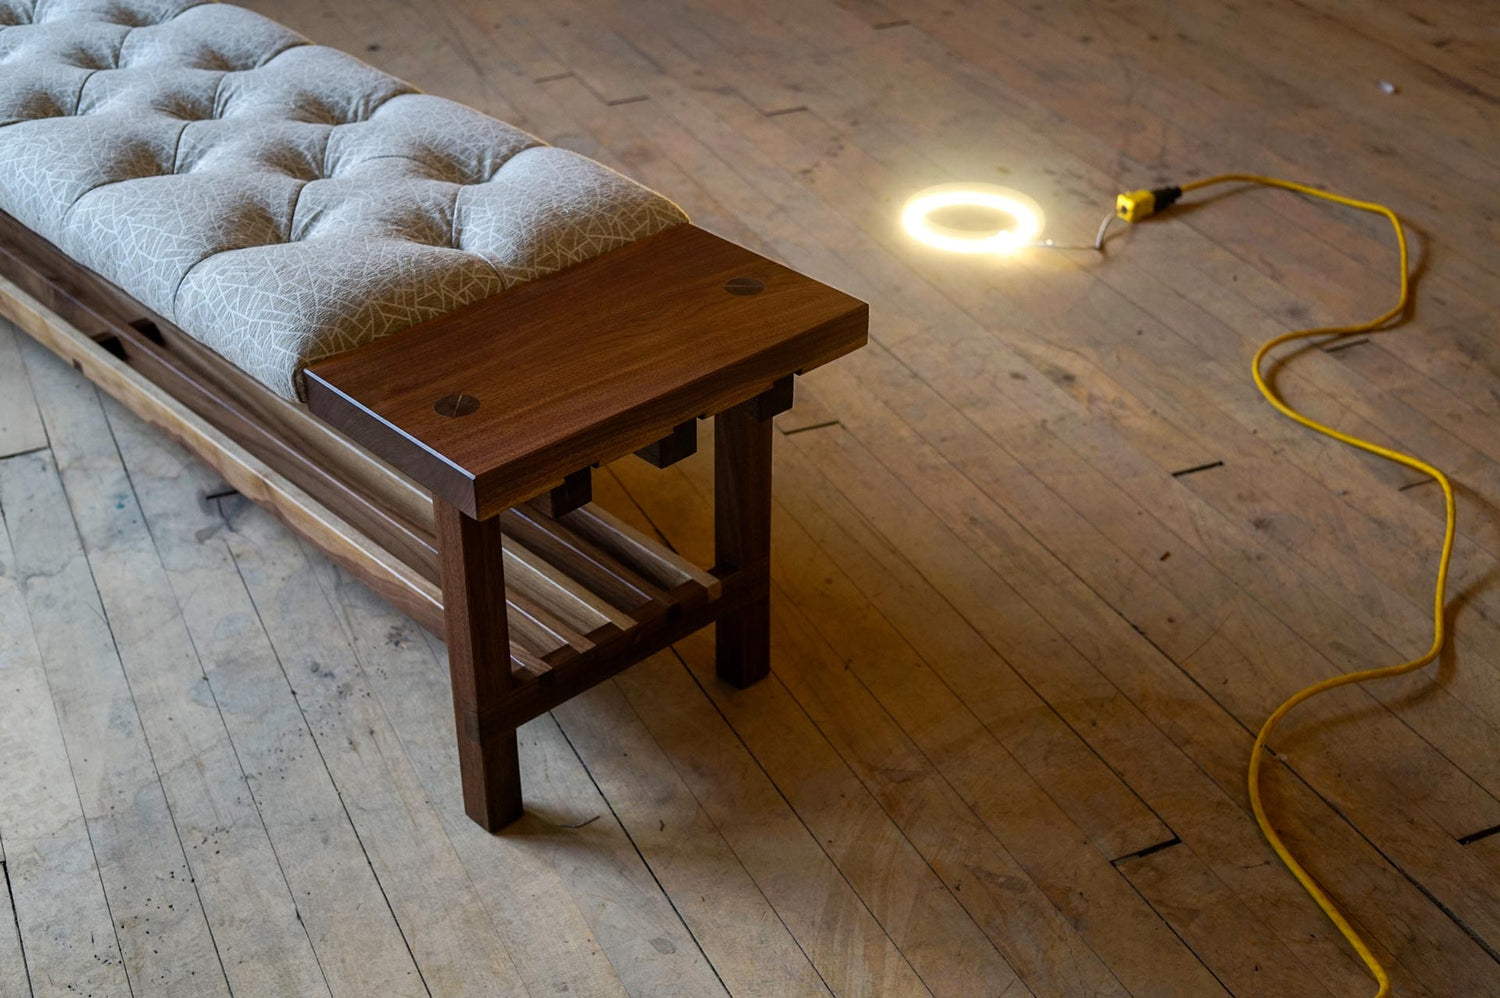 A custom bench with fine joinery, lit from behind with a visible light sitting on the floor with the cord running along the edge of the photo.